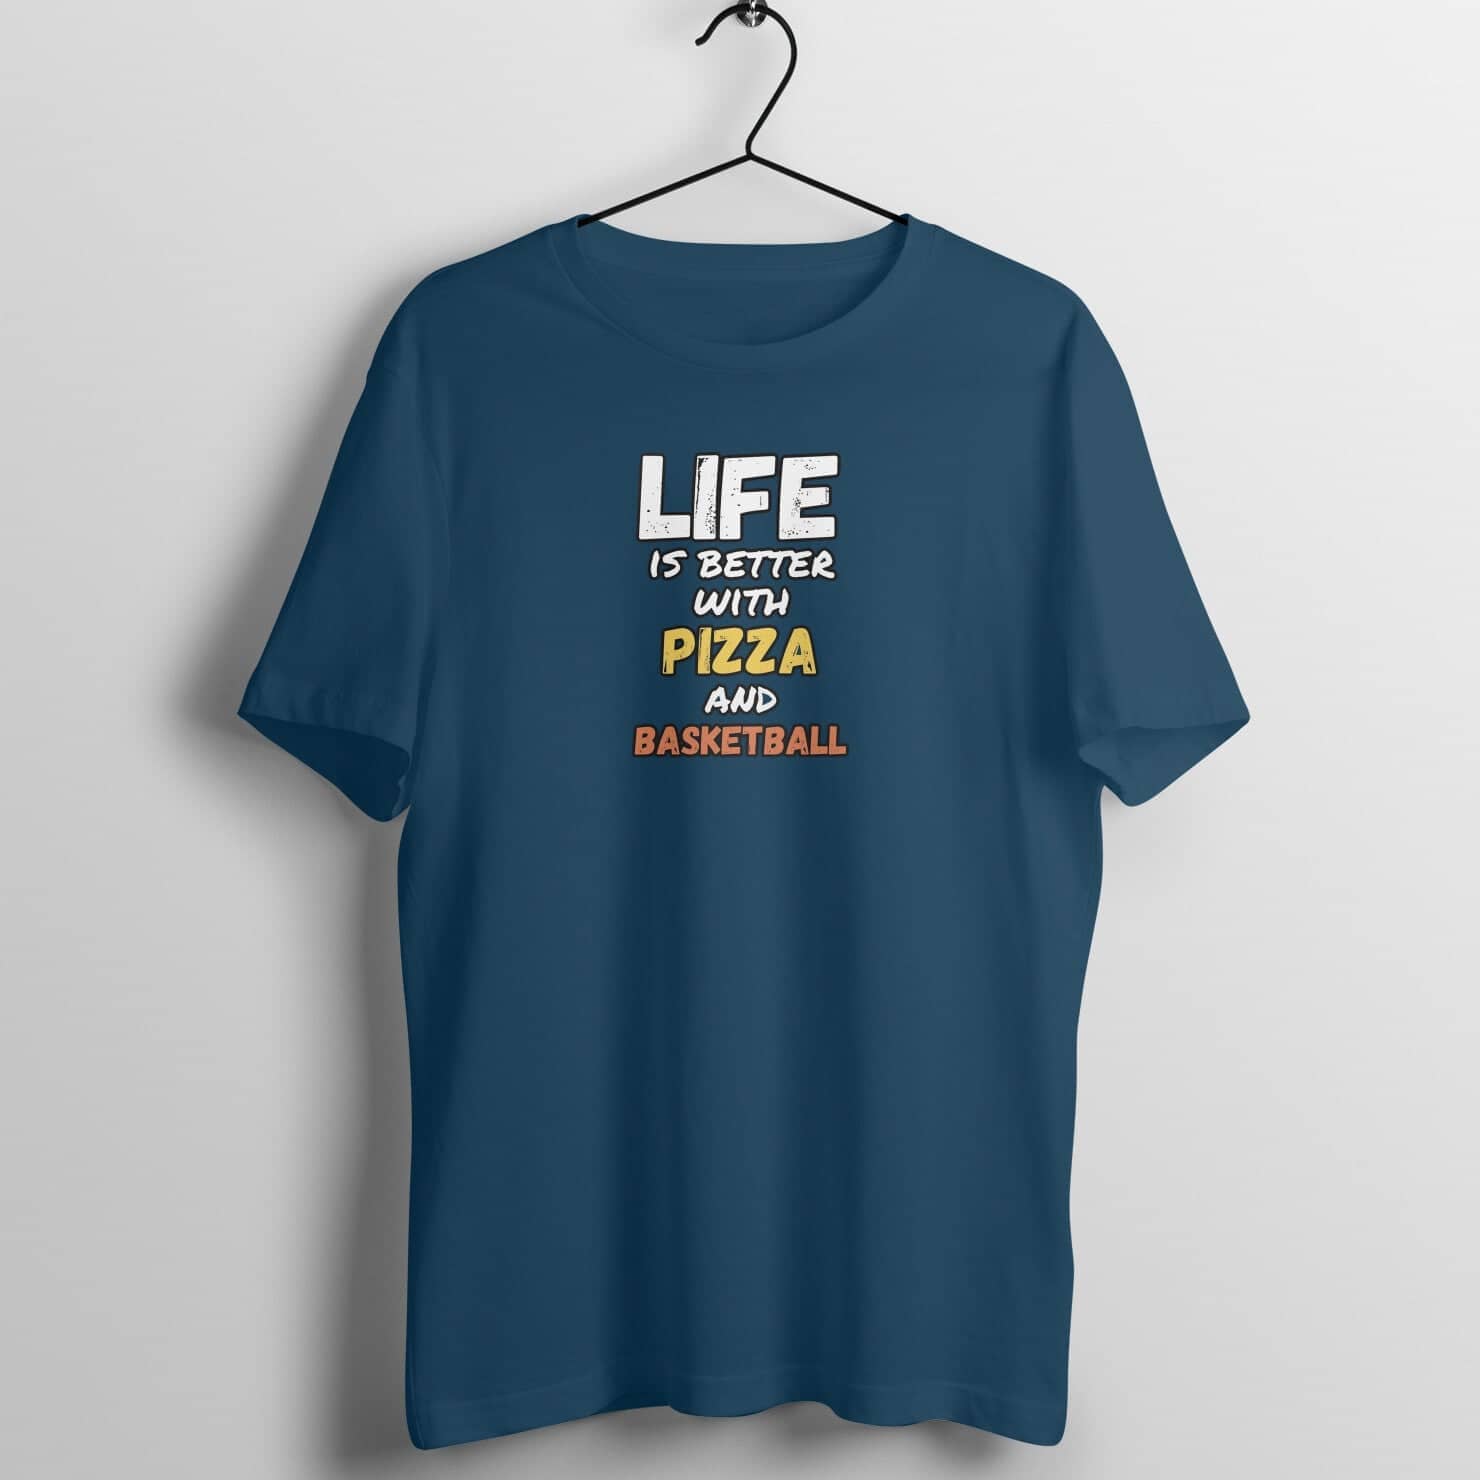 Life is Better With Pizza and Basketball Exclusive T Shirt for Men freeshipping - Catch My Drift India